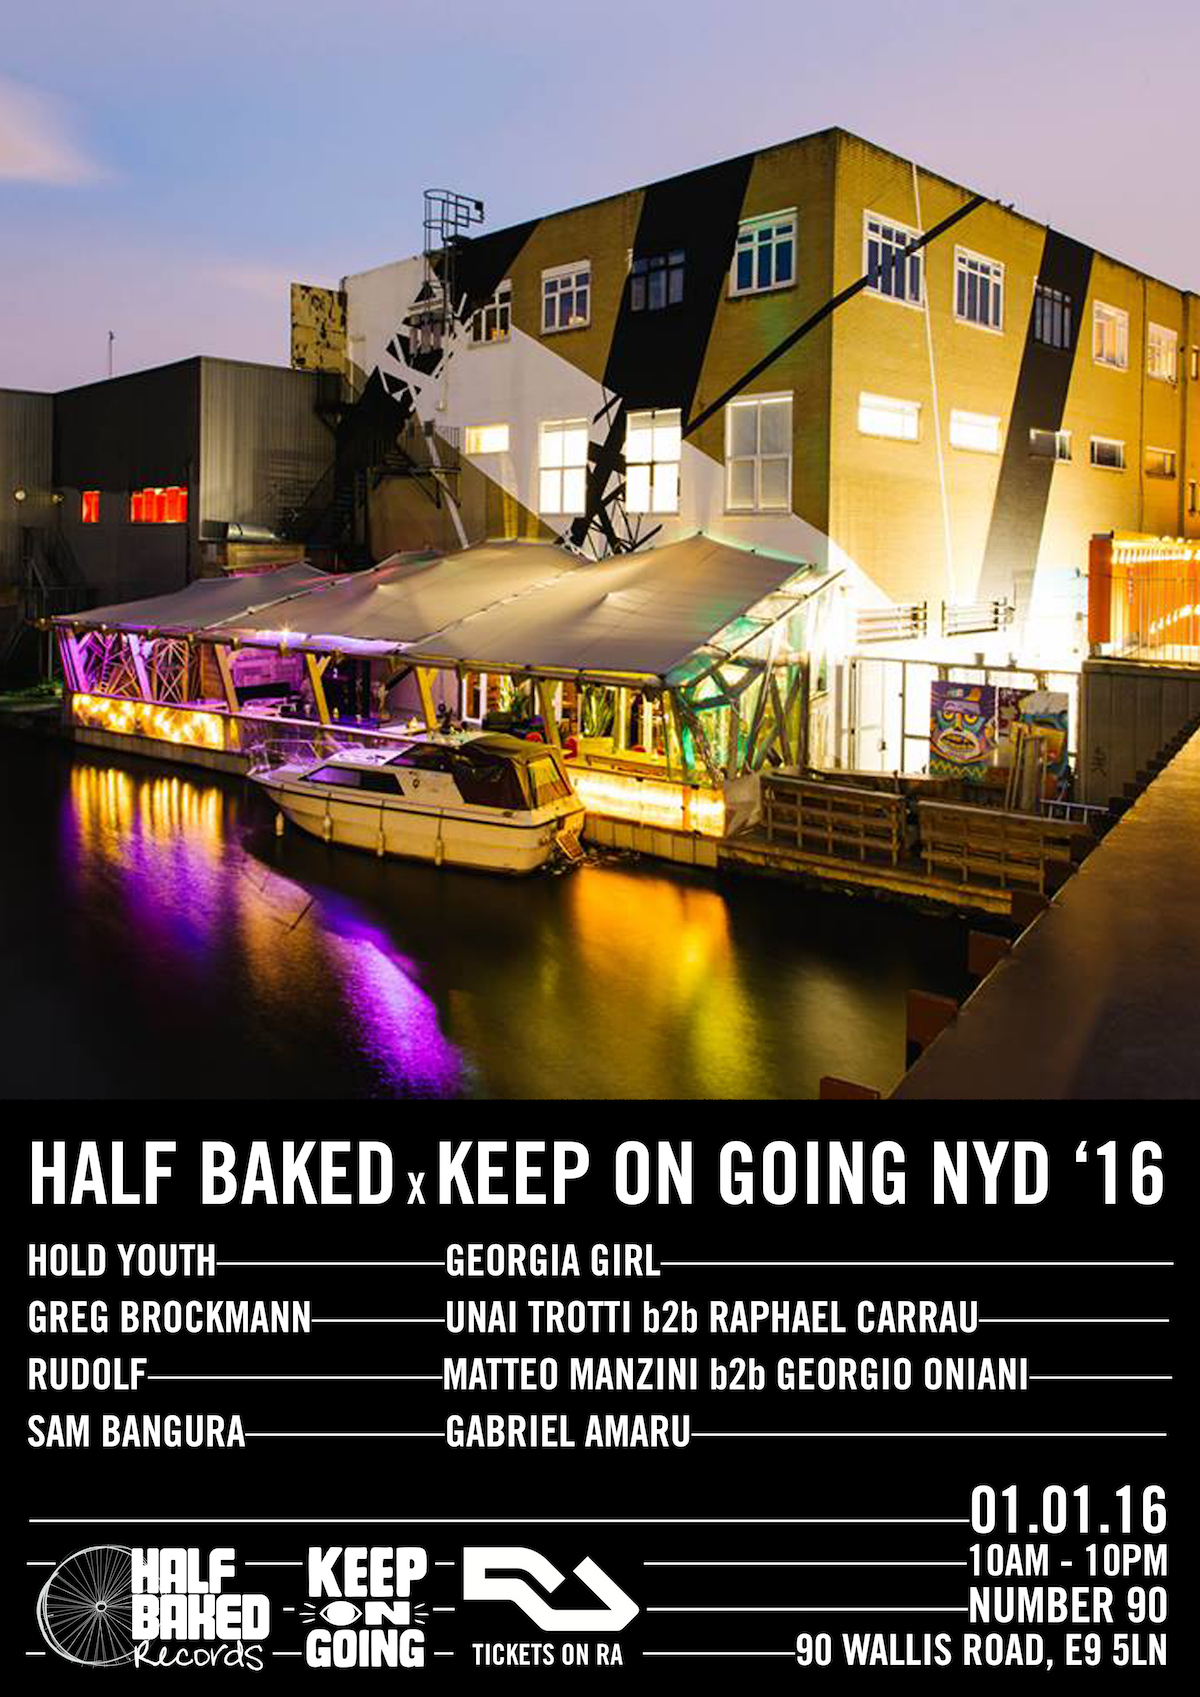 Half Baked x Keep On Going NYD ’16